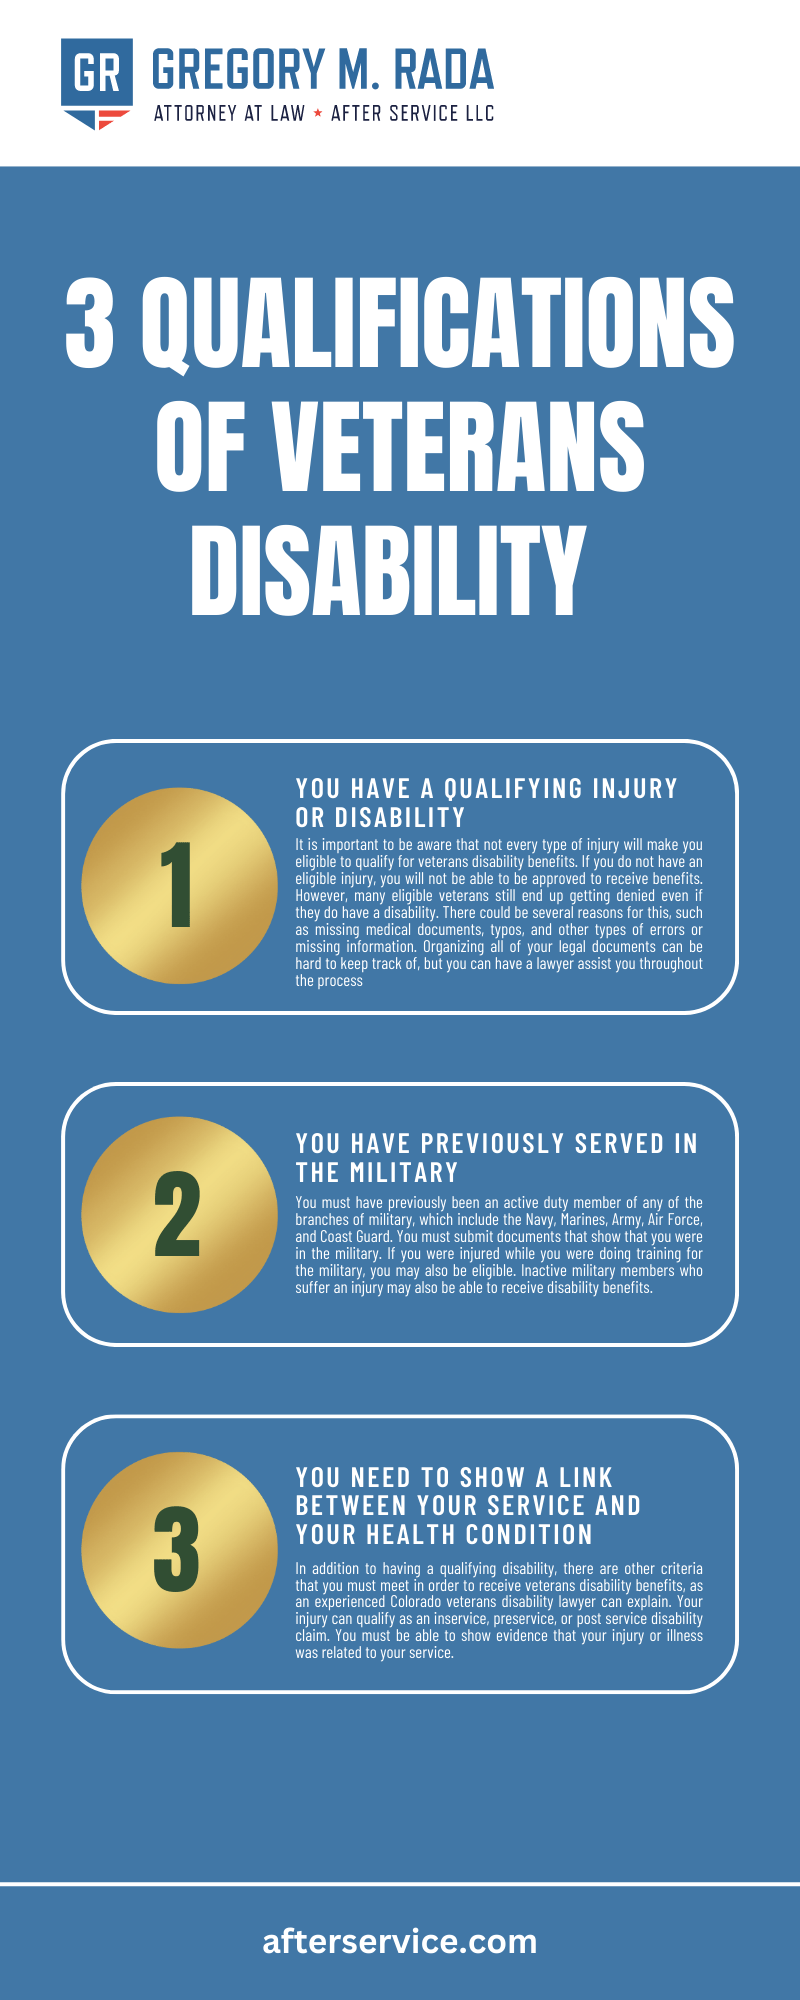 3 QUALIFICATIONS OF VETERANS DISABILITY INFOGRAPHIC